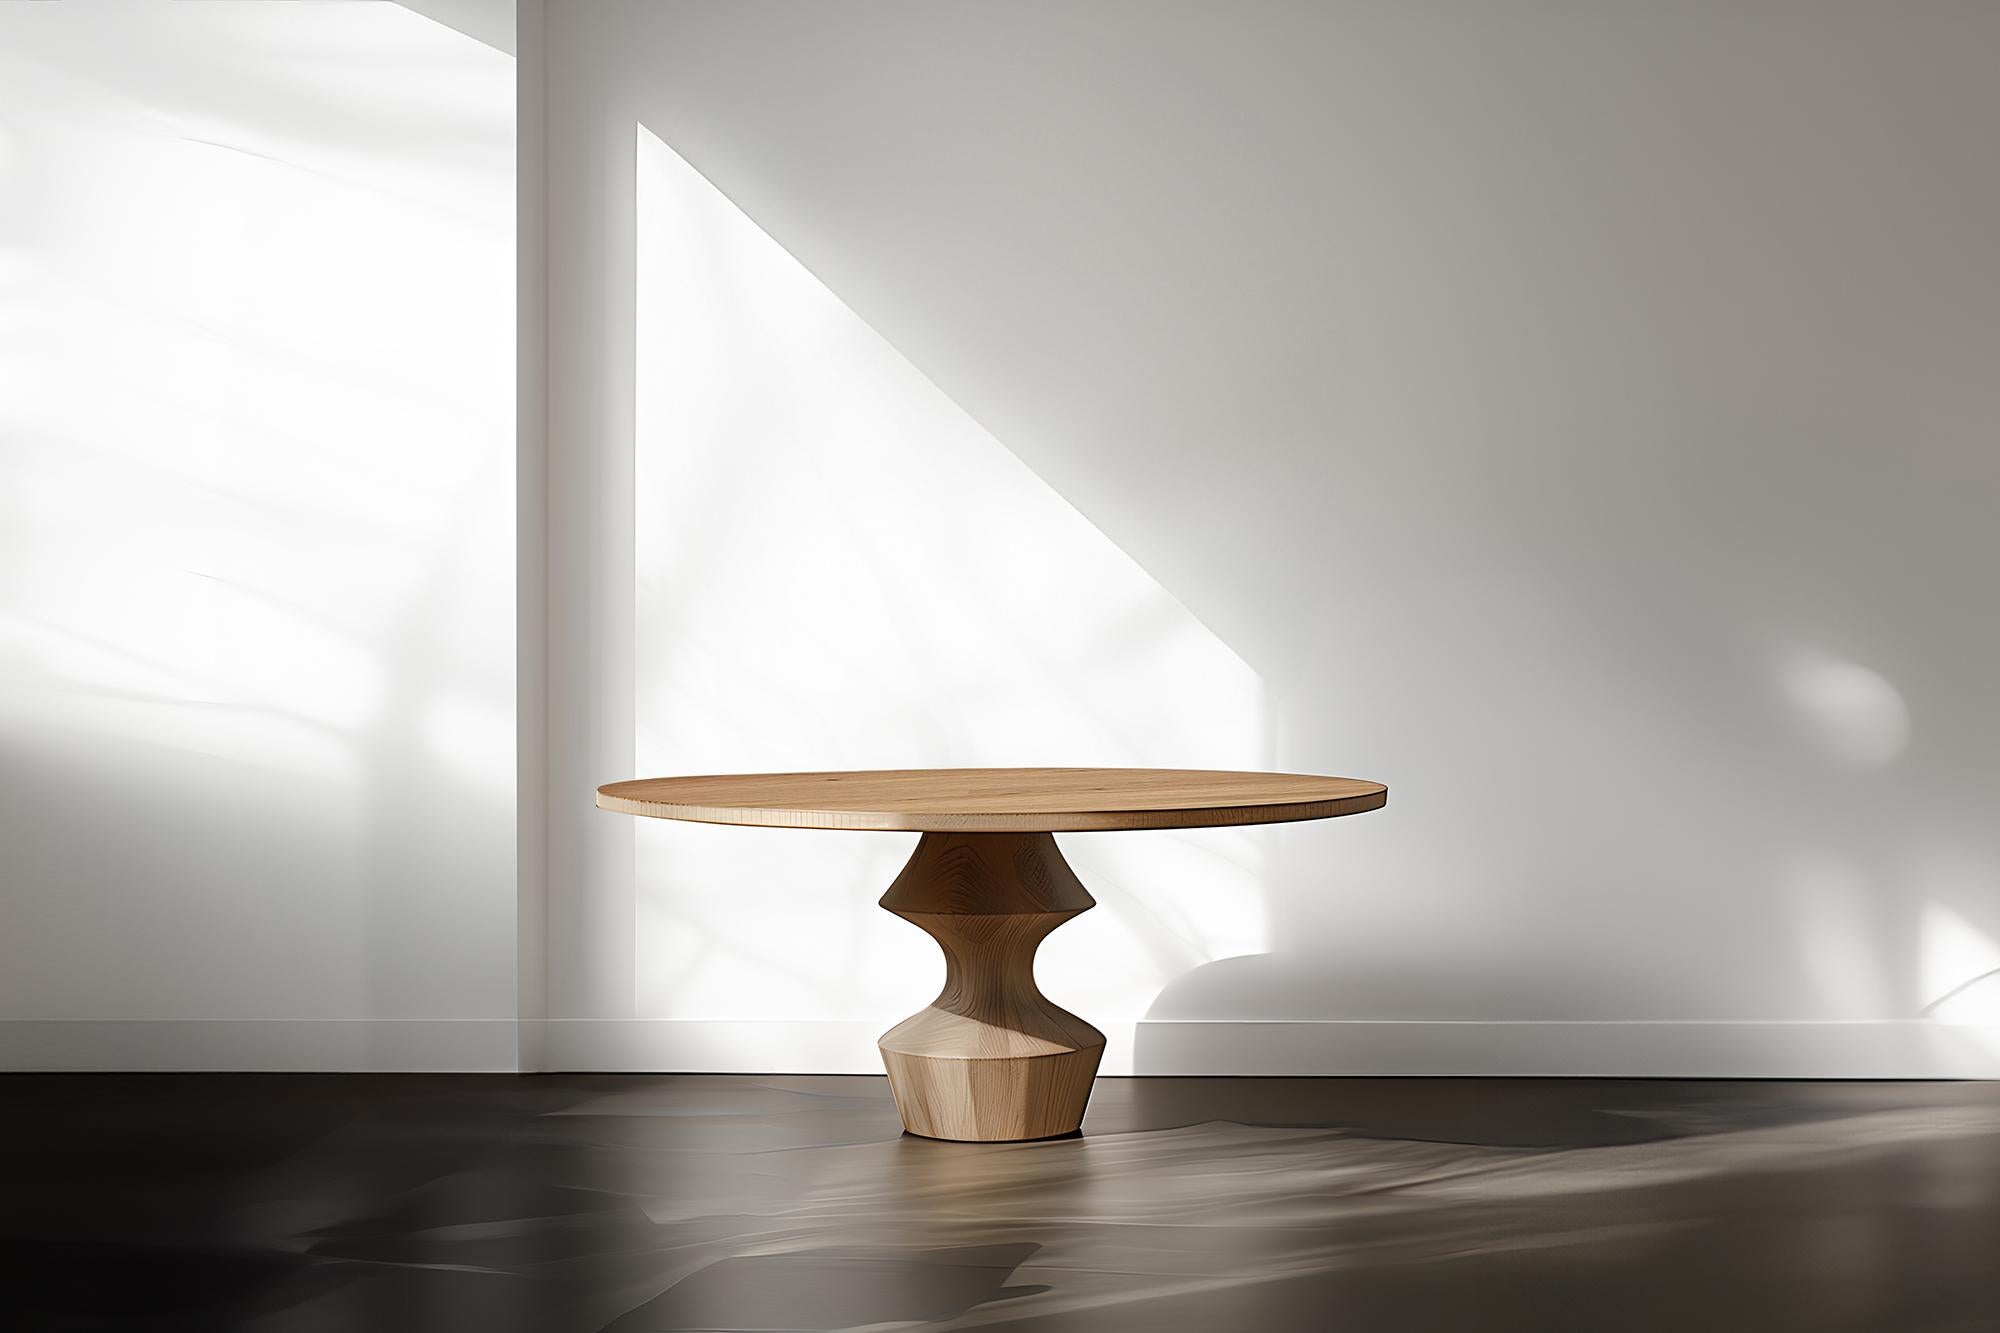 Socle Dessert Tables No11, Sweet Design in Solid Wood by NONO

——

Introducing the 